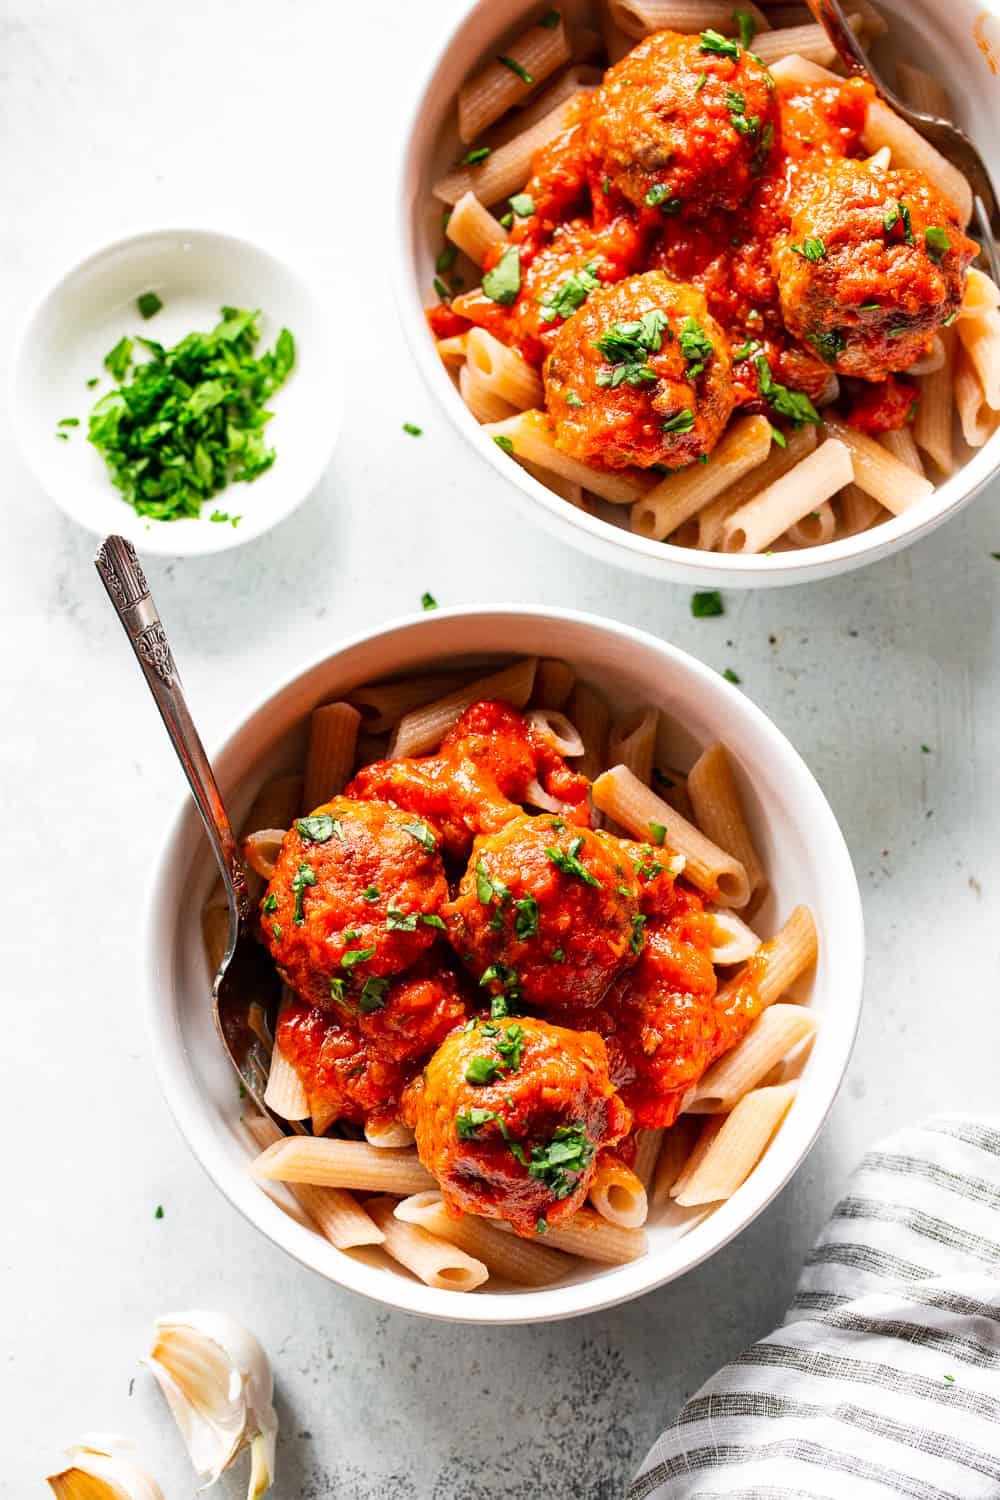 These quick skillet meatballs have been a favorite weeknight meal for my family for years!  You can prep and cook these meatballs in just 25 minutes and they never get complaints.  Serve over veggie noodles or spaghetti squash, with gluten free or grain free pasta, over sautéed greens or with a big green salad.  They're paleo, Whole30 and keto friendly. #paleo #keto #meatballs #lowcarb #cleaneating #whole30